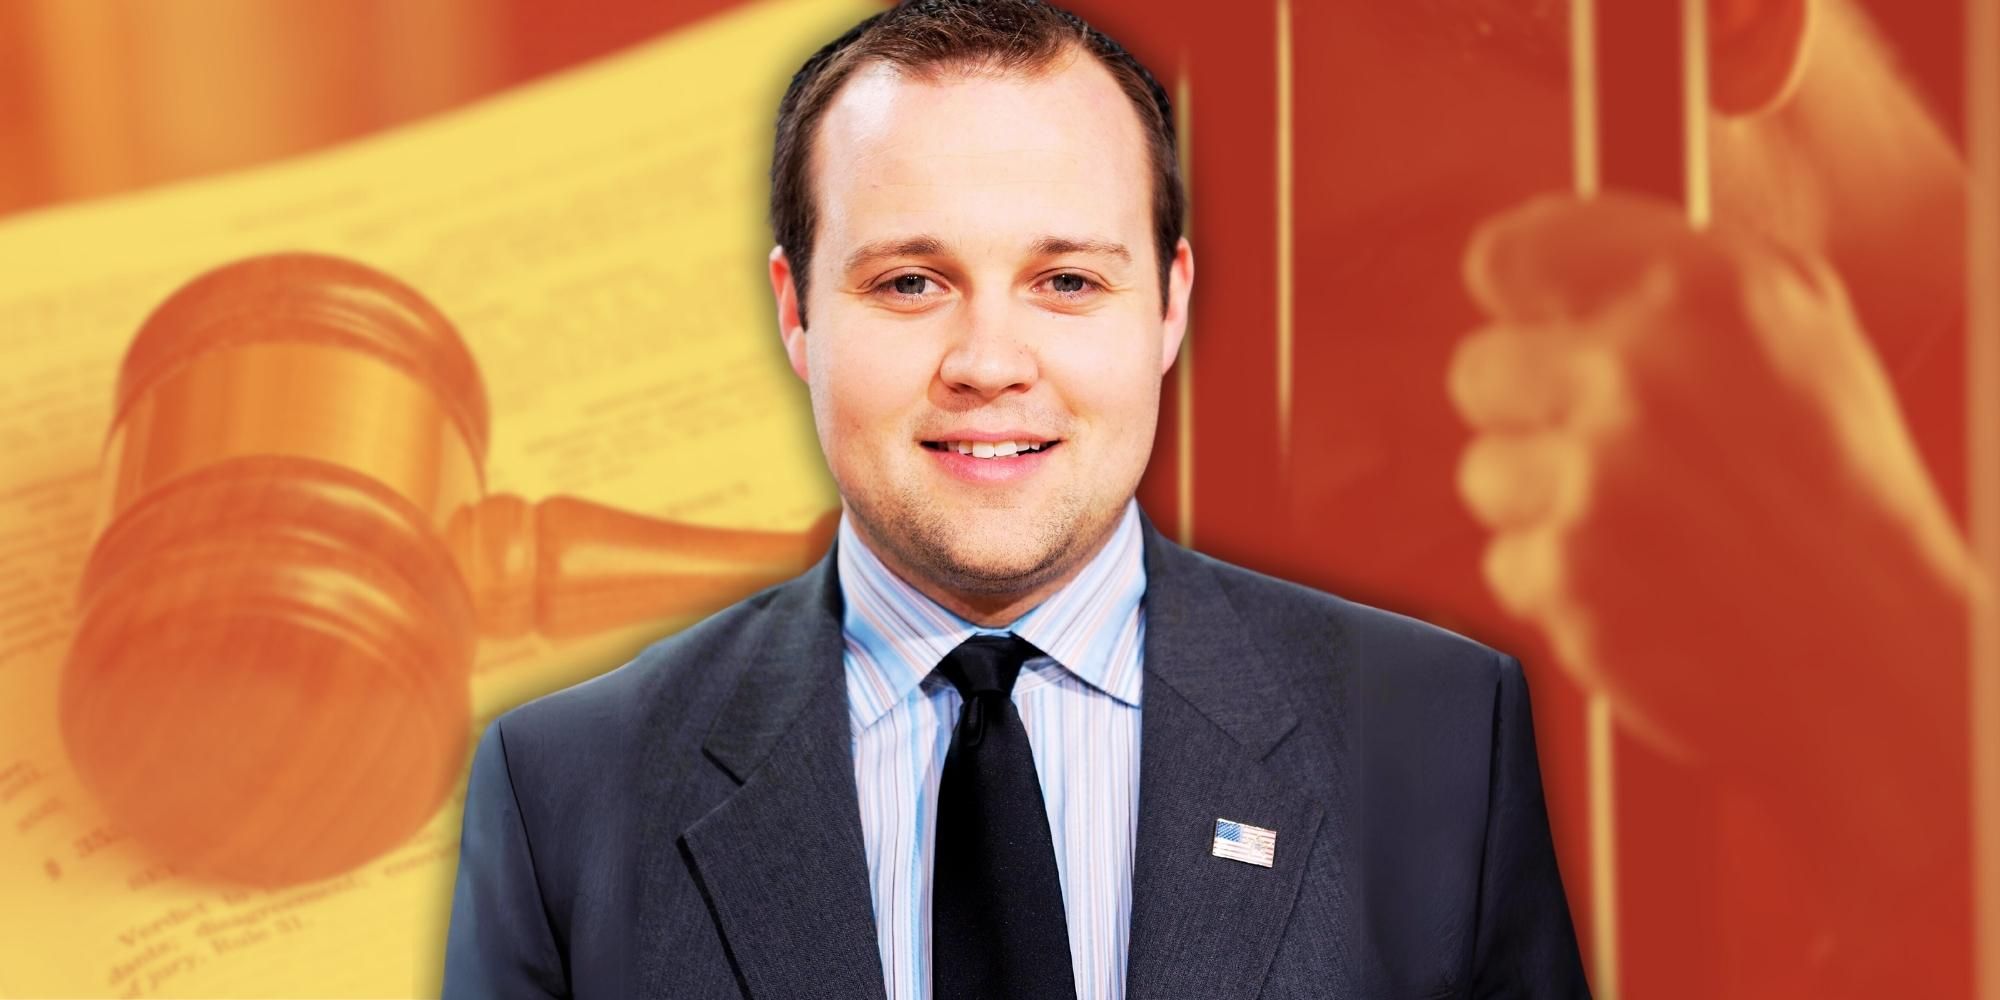 19 Kids & Counting alum Josh Duggar, with judge's gavel and jail cell bars behind him